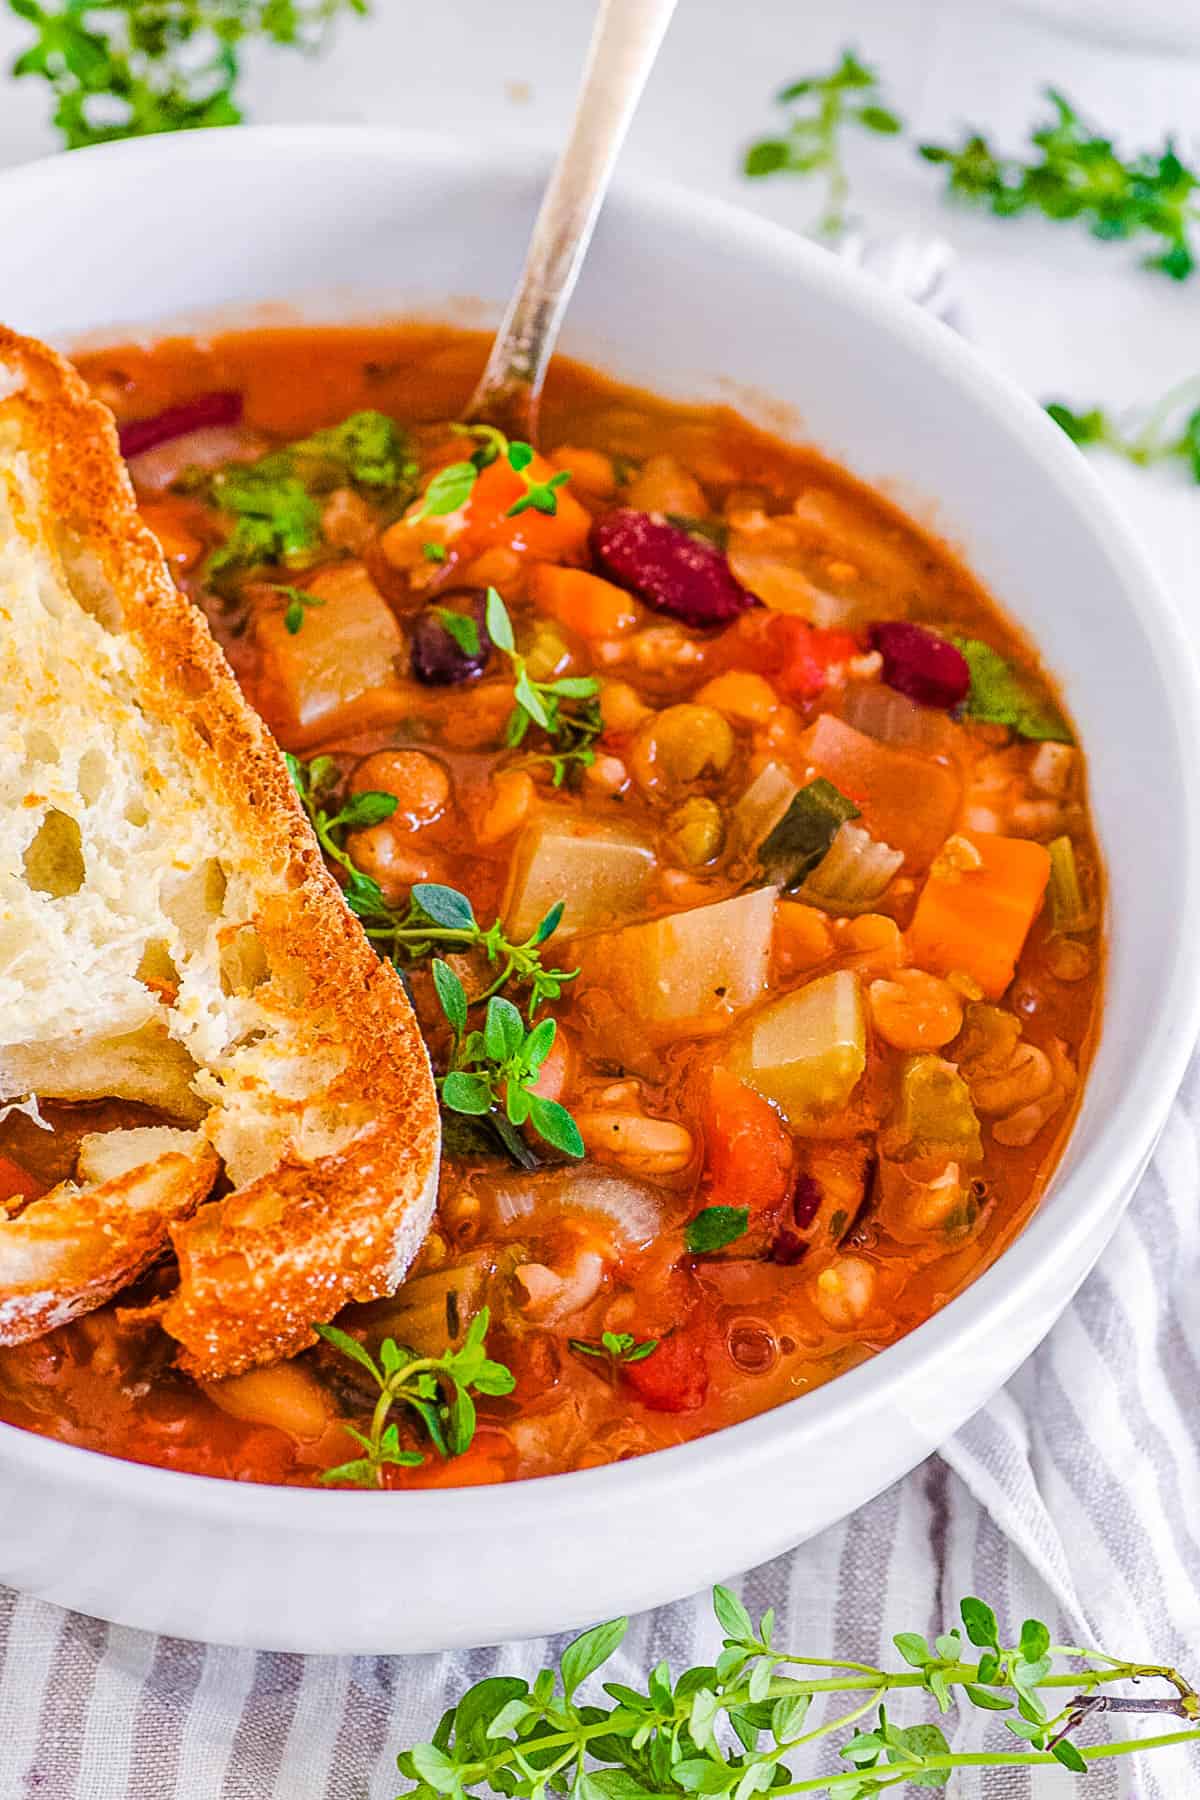 15 bean soup crock pot recipe served in a white bowl with garlic bread